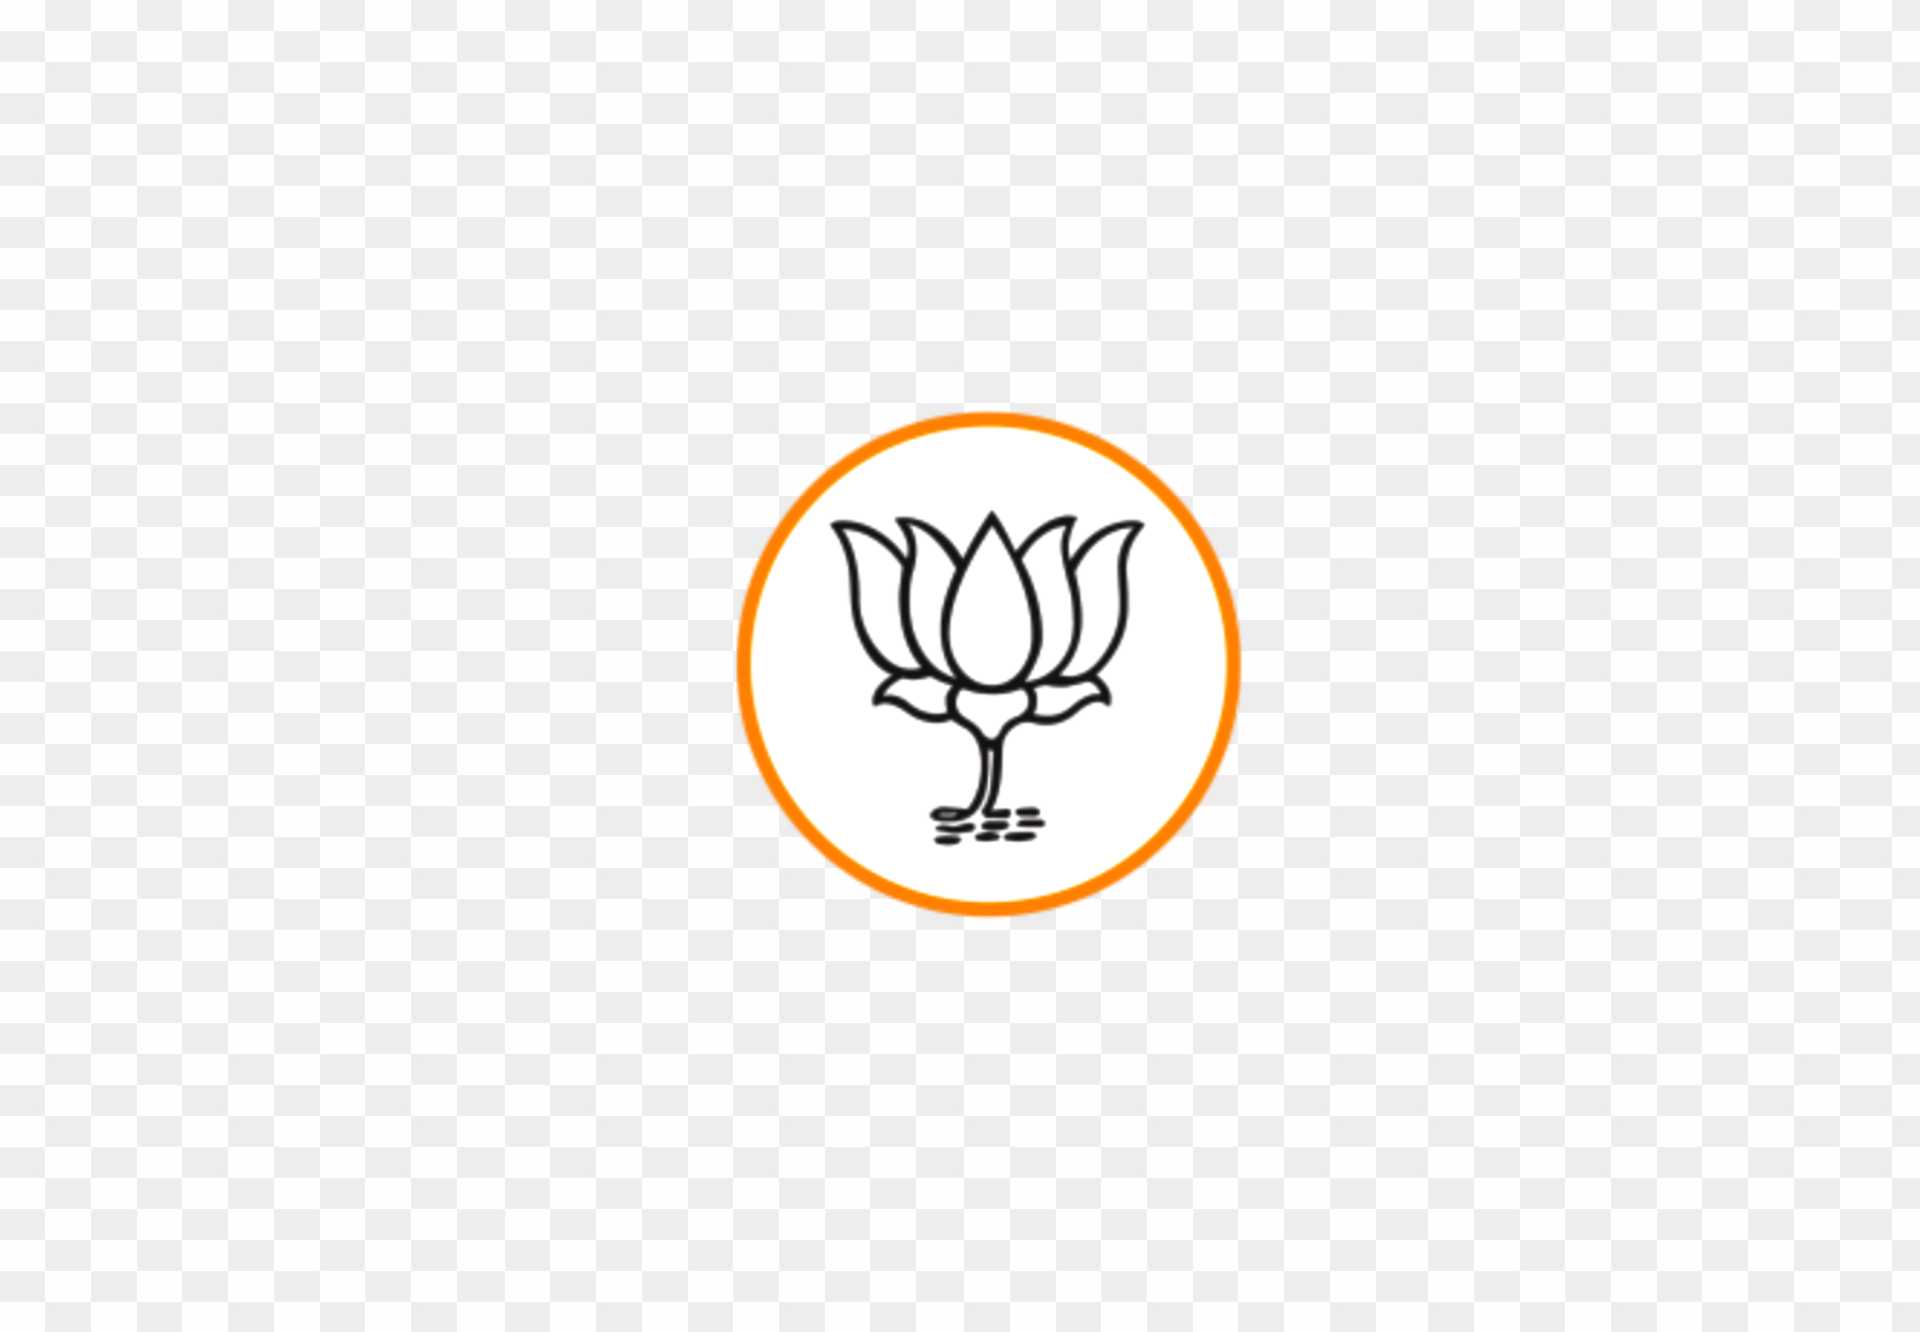 Bjp png images | PNGWing